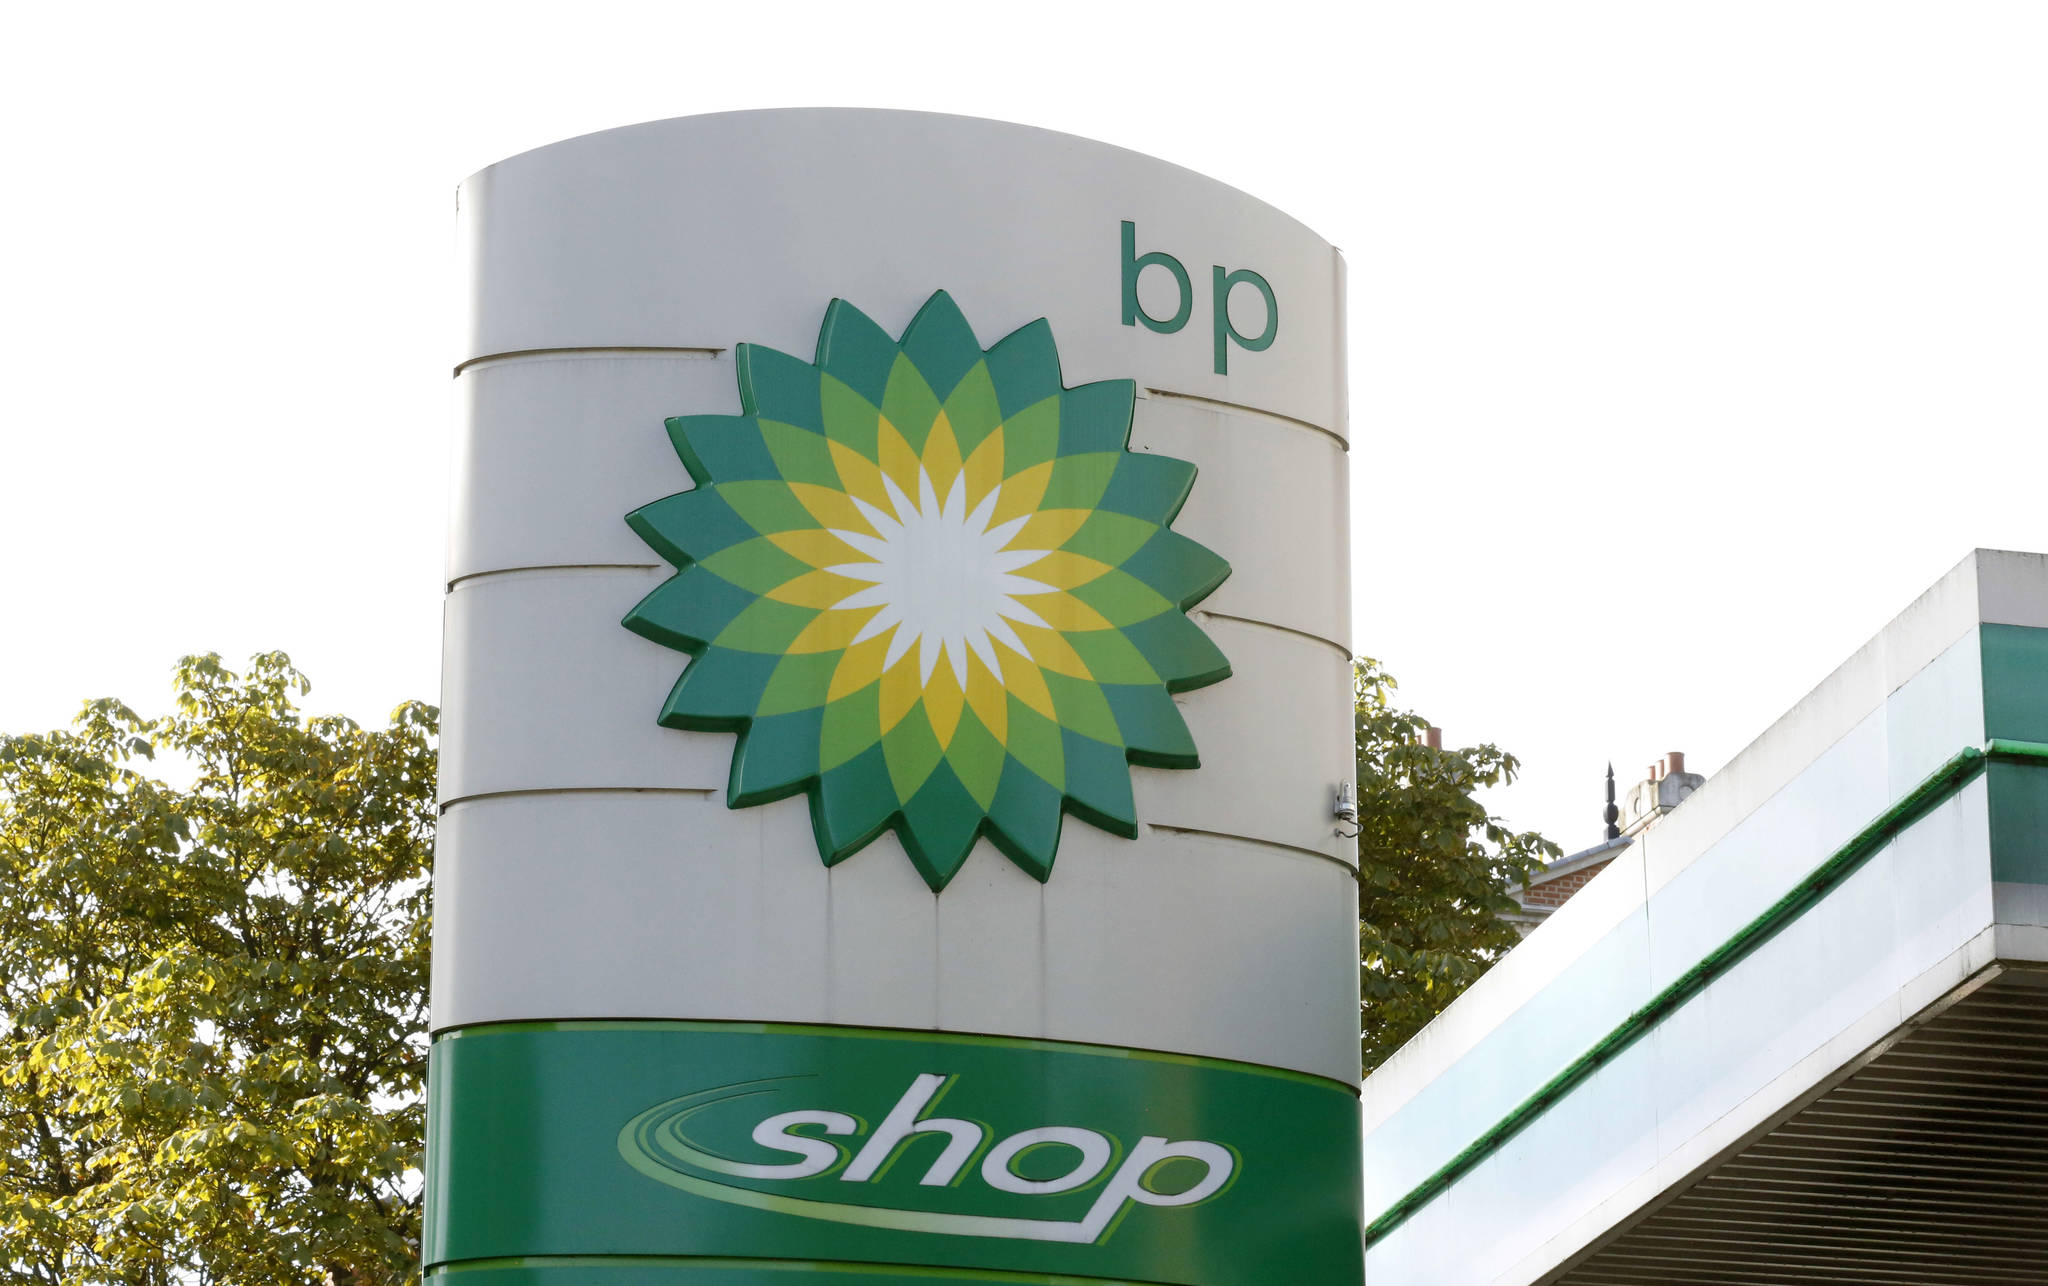 This Aug. 1, 2017, file photo shows the oil producer BP company logo at a petrol station in London. BP, a major player on Alaska’s North Slope for decades, is selling all of its Alaska assets, the company announced Tuesday, Aug. 27, 2019. Hilcorp Alaska is purchasing BP interests in both the Prudhoe Bay oil field and the trans-Alaska pipeline for $5.6 billion, BP announced in a release.(AP Photo/Caroline Spiezio, File)